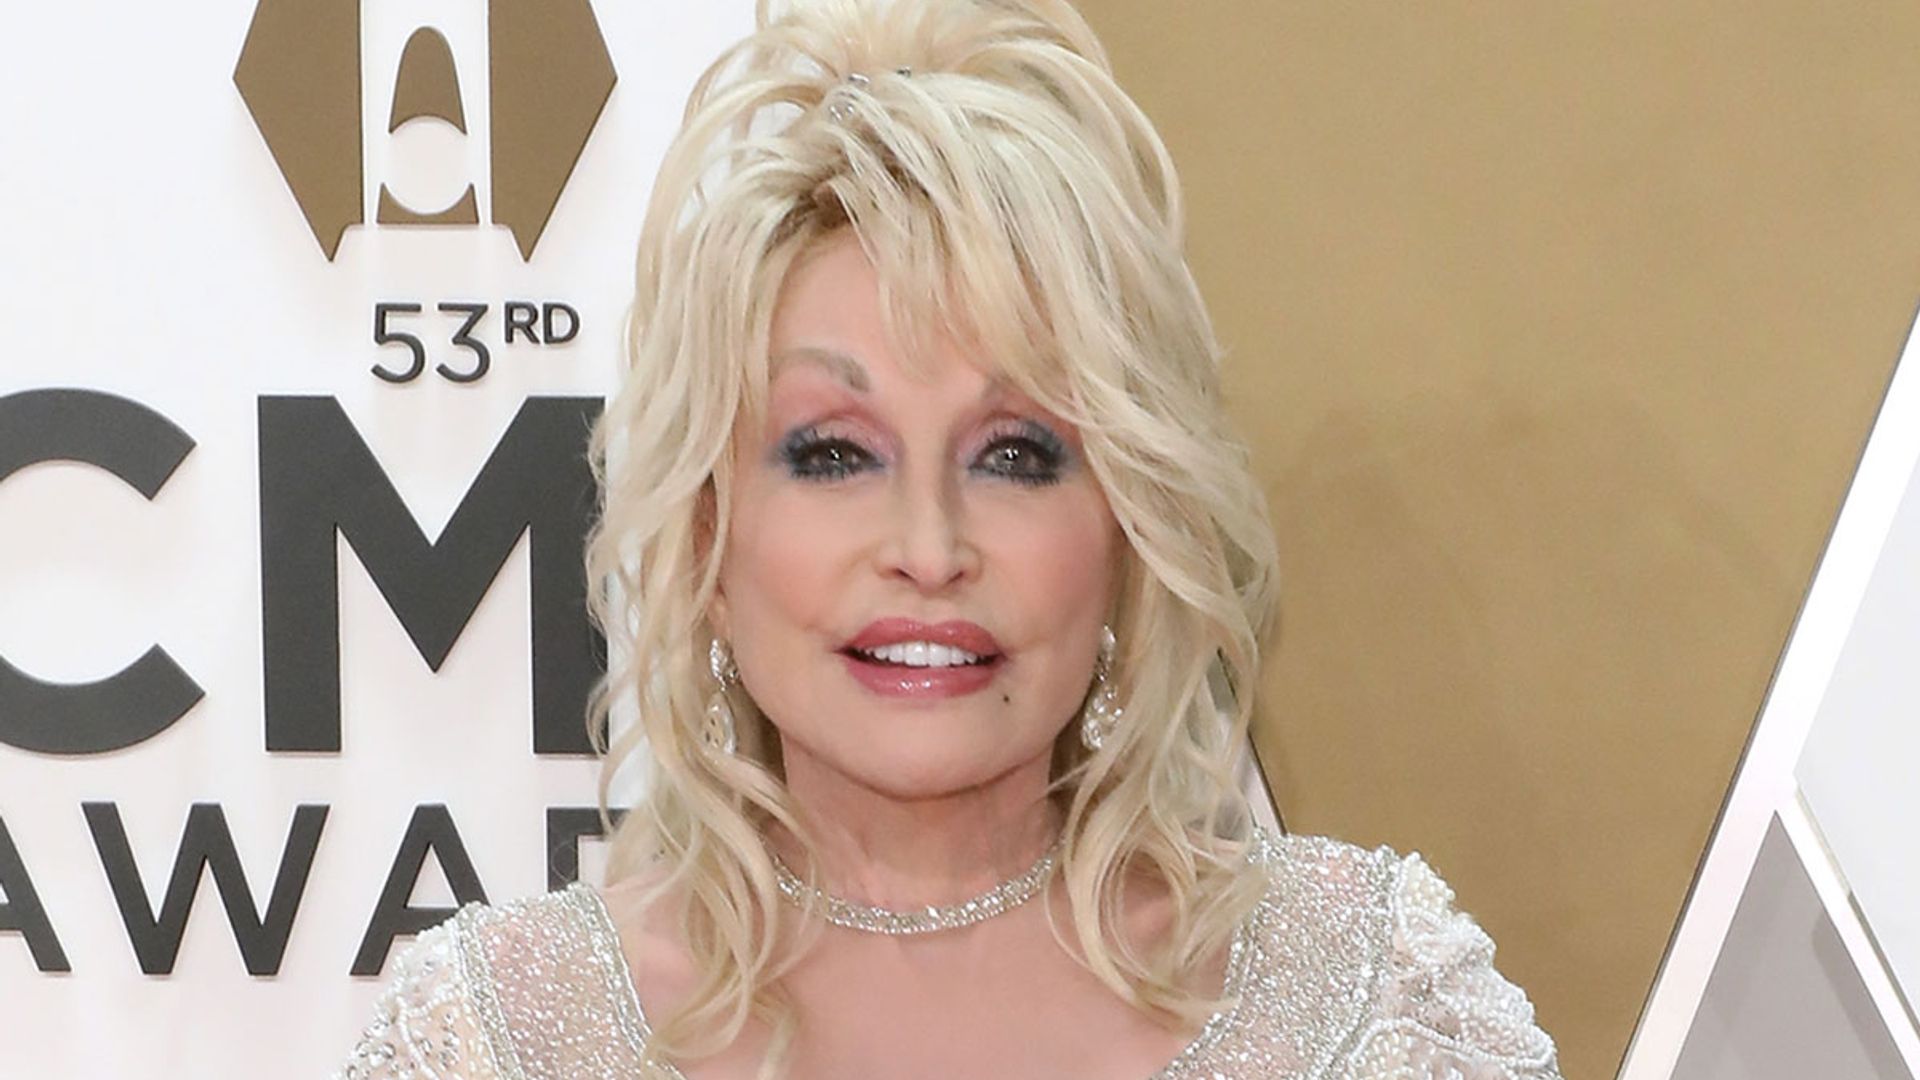 Dolly Parton shares extremely rare photo of her 'supportive' husband Carl Dean